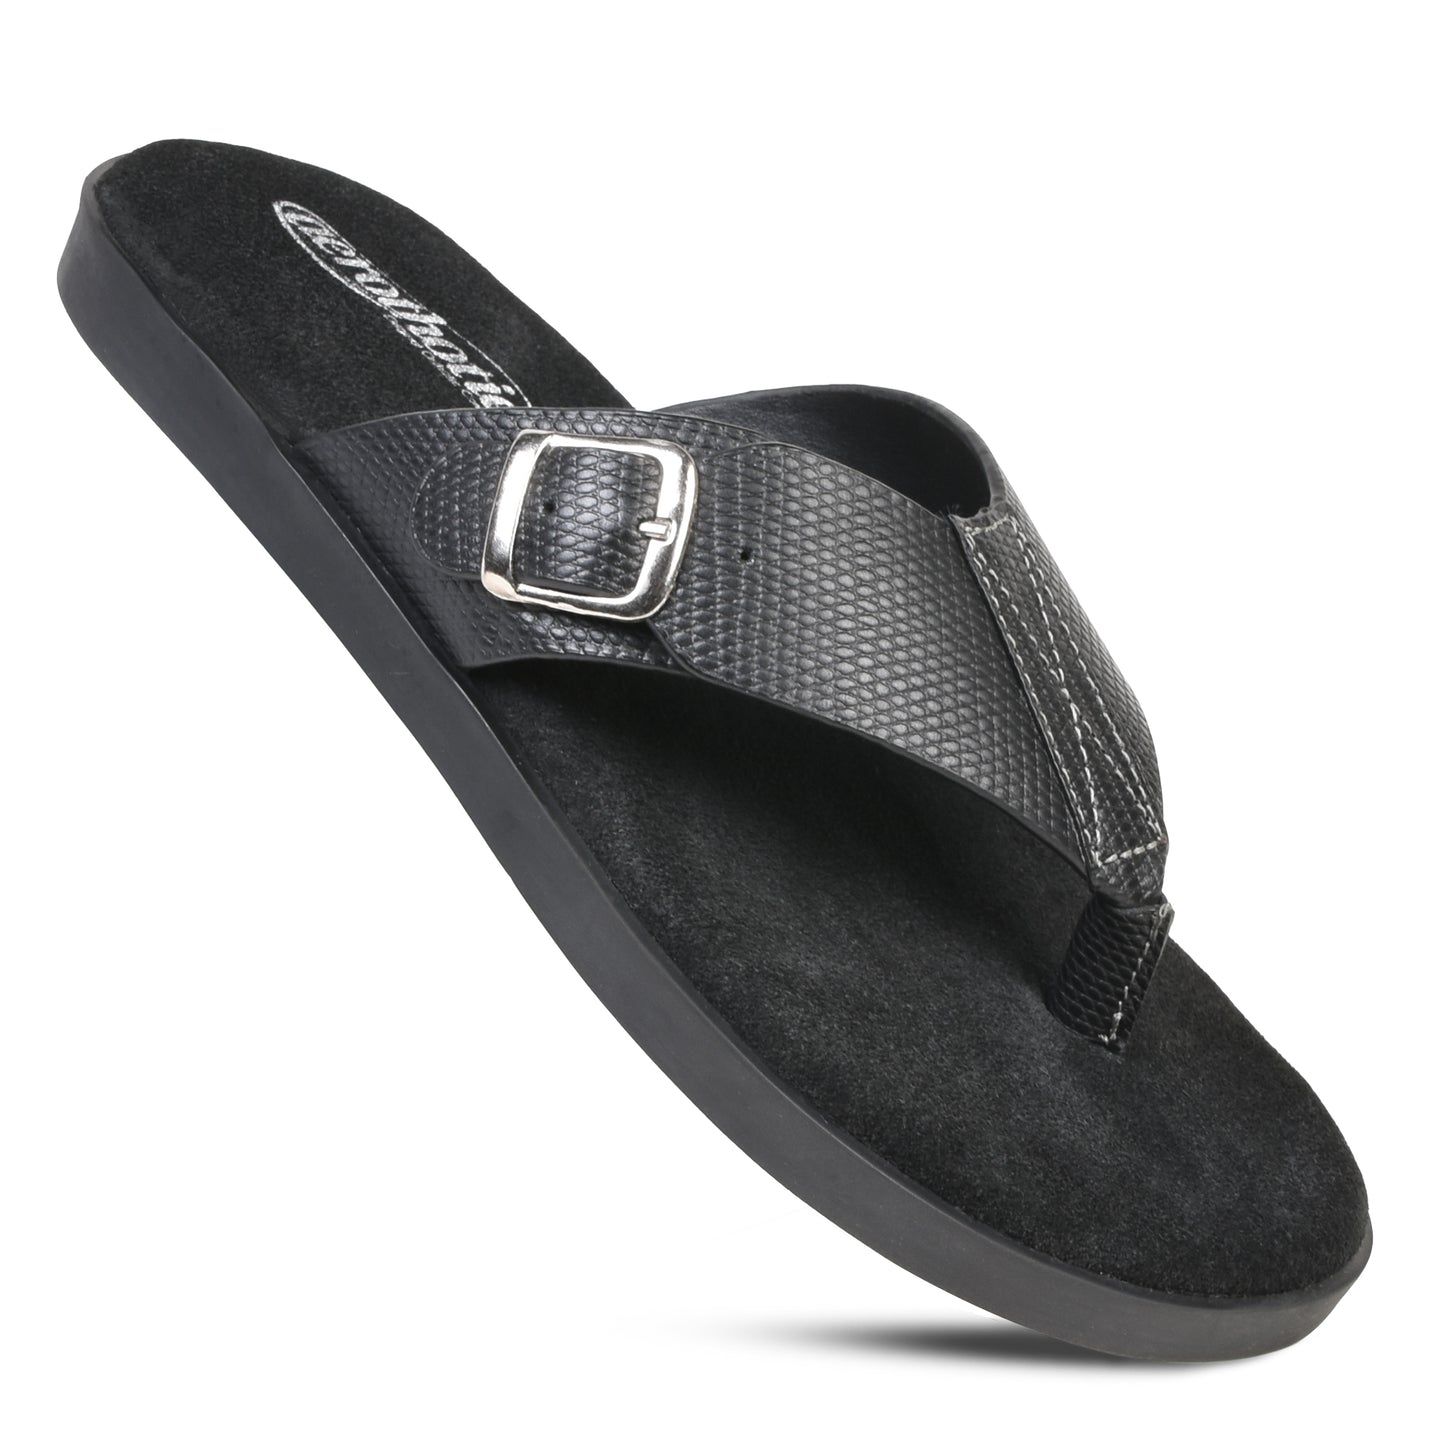 AEROTHOTIC Cyneric Gents Original Leather Flip Flops Sandals with Adjustable Strap – Original Thailand Imported – M2391